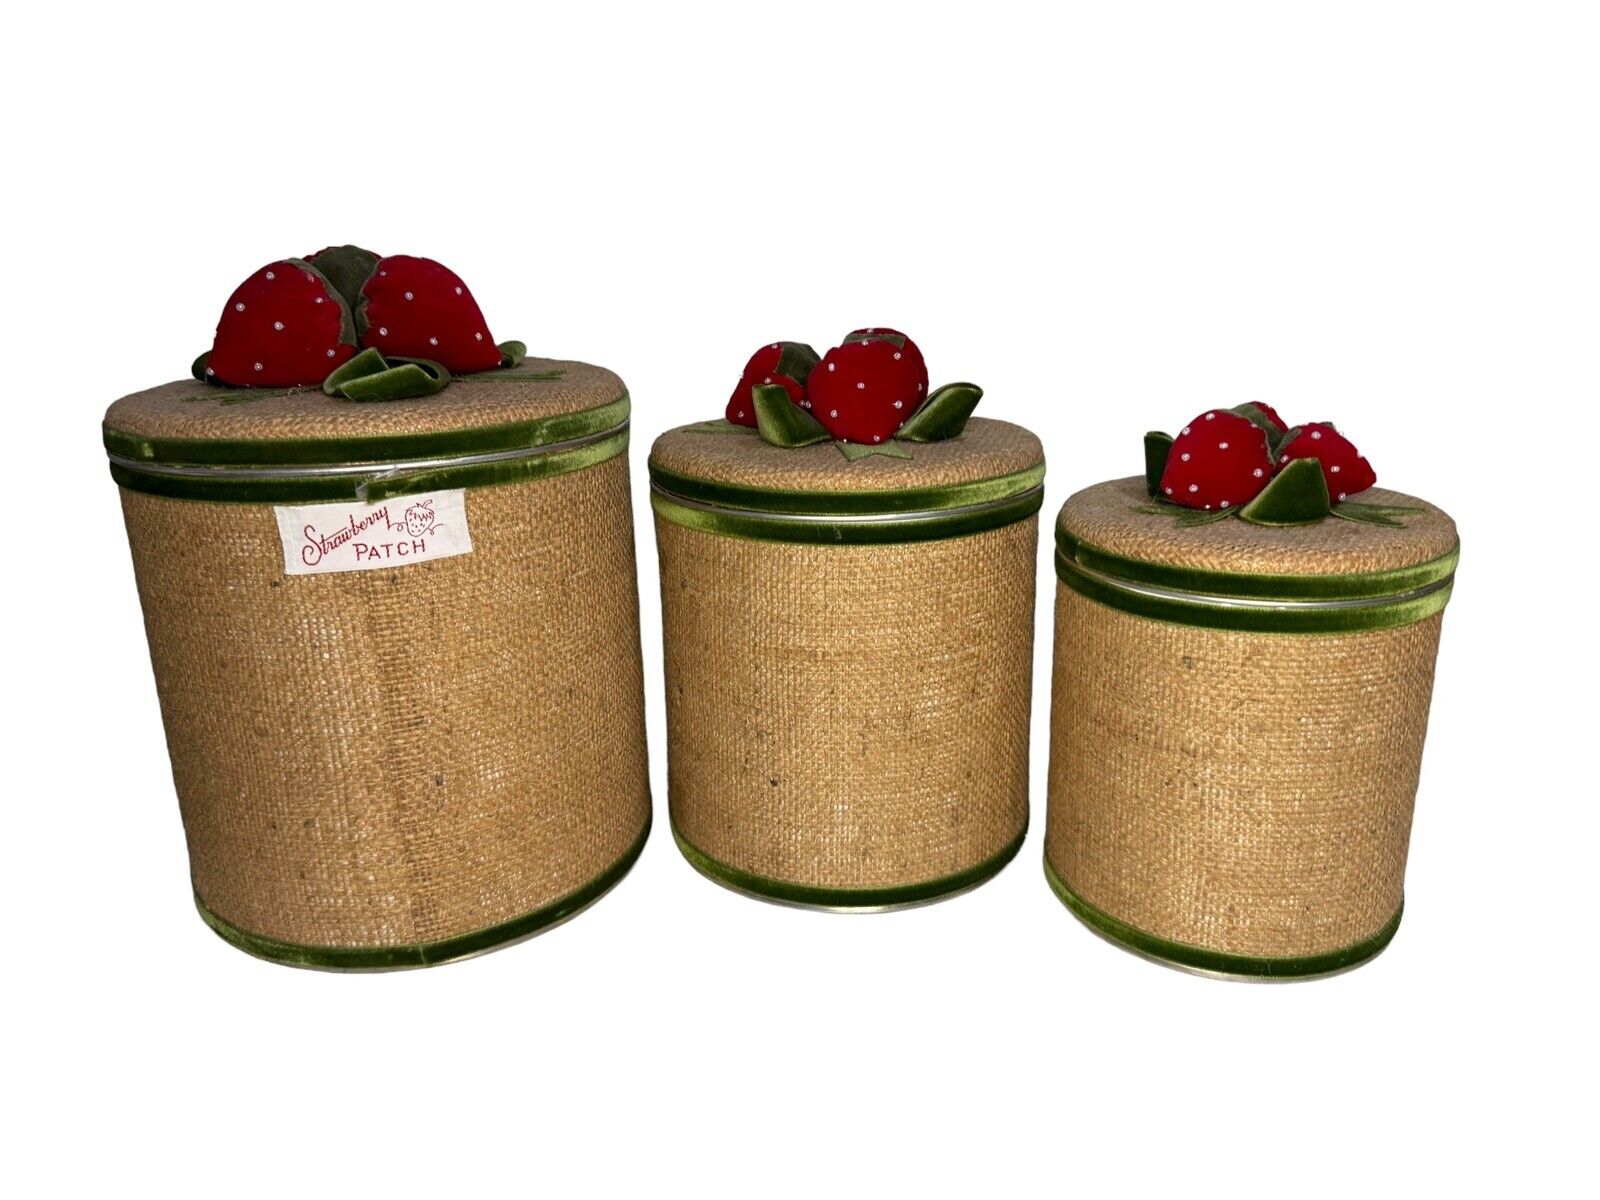 3 Vintage Decoware Canisters Metal Burlap Strawberries Felt Nesting Containers